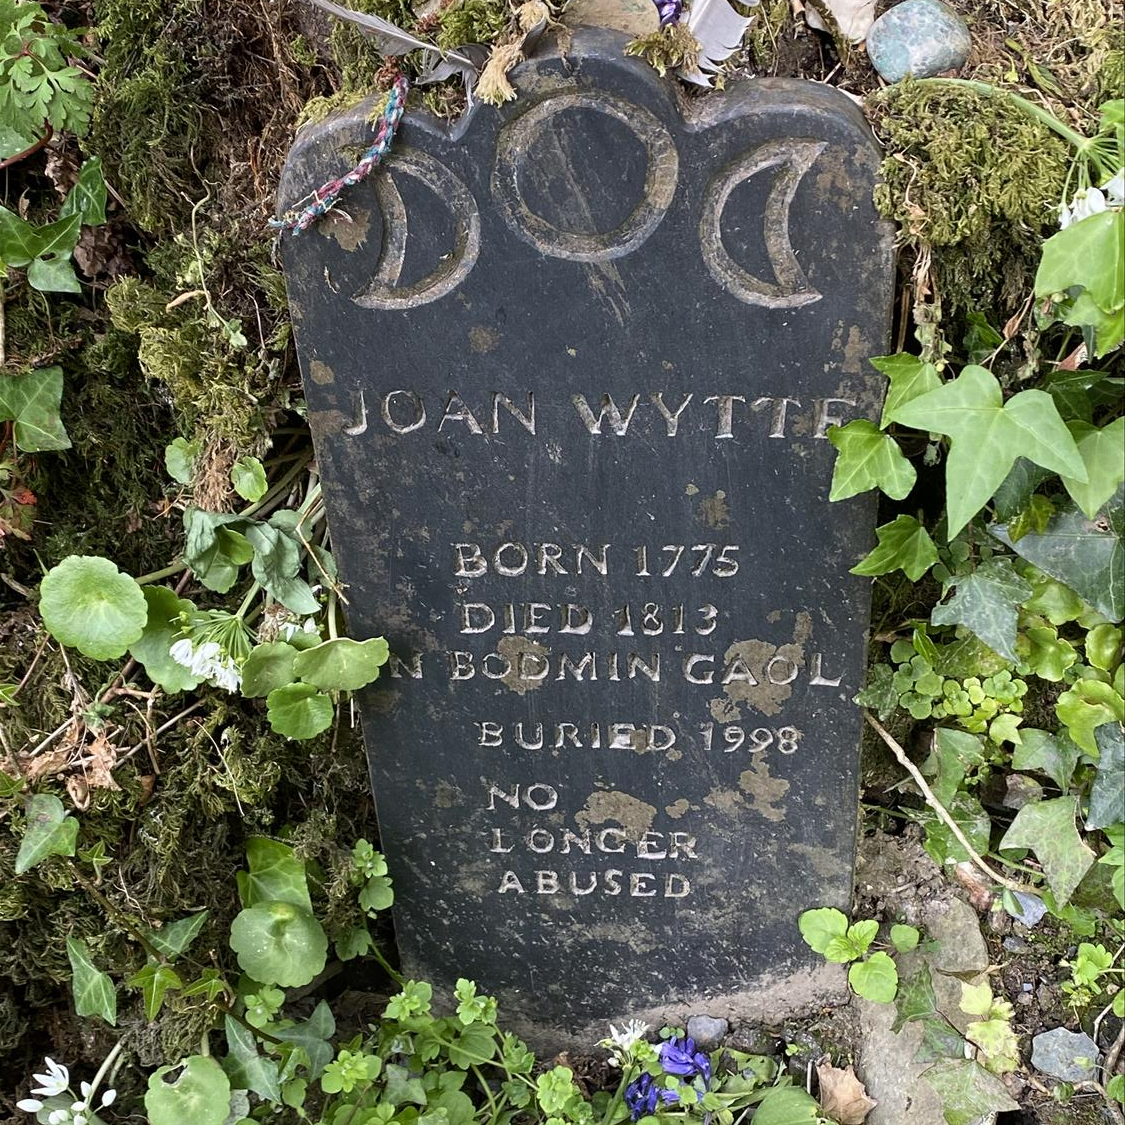 The “Fighting Fairy Woman of Bodmin Town”, Joan Wytte's gravestone